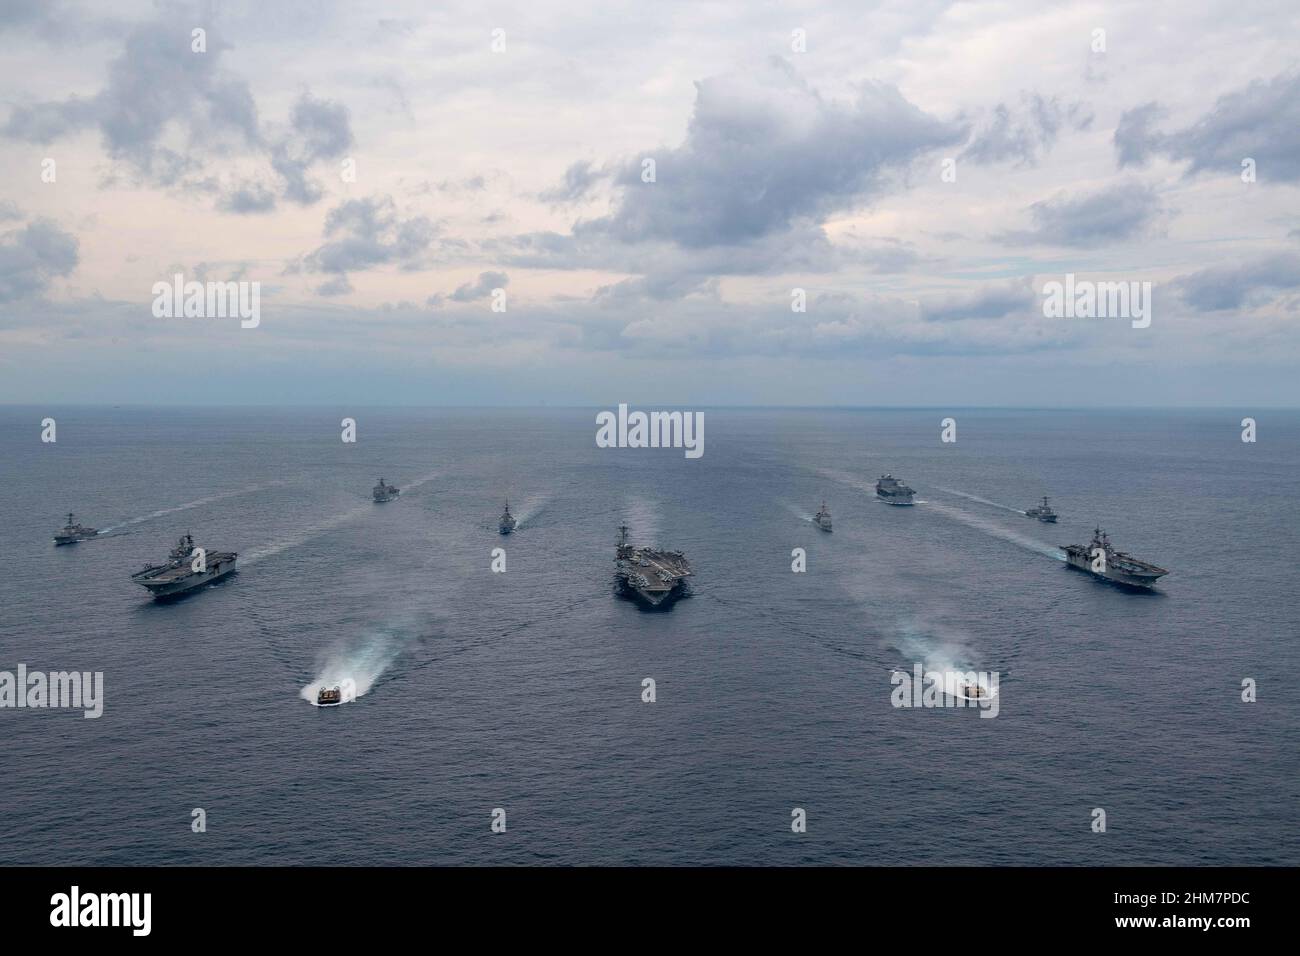 PHILIPPINE SEA (Feb. 7, 2022) Ships of the America and Essex Amphibious Ready Groups, and Carrier Strike Group (CSG) 3, sail in formation with the Japan Maritime Self-Defense Force during exercise Noble Fusion. Front row: Landing craft, air cushion from Assault Craft Unit (ACU) 5. Second row, left to right: USS America (LHA 6), USS Abraham Lincoln (CVN 72), USS Essex (LHD 2). Third row, left to right: USS Dewey (DDG 105), JS Kongō (DDG 173), USS Mobile Bay (CG 53), USS Spruance (DDG 111). Back row, left to right: USS Ashland (LSD 48), USS Miguel Keith (ESB 5). Noble Fusion demonstrates that Na Stock Photo